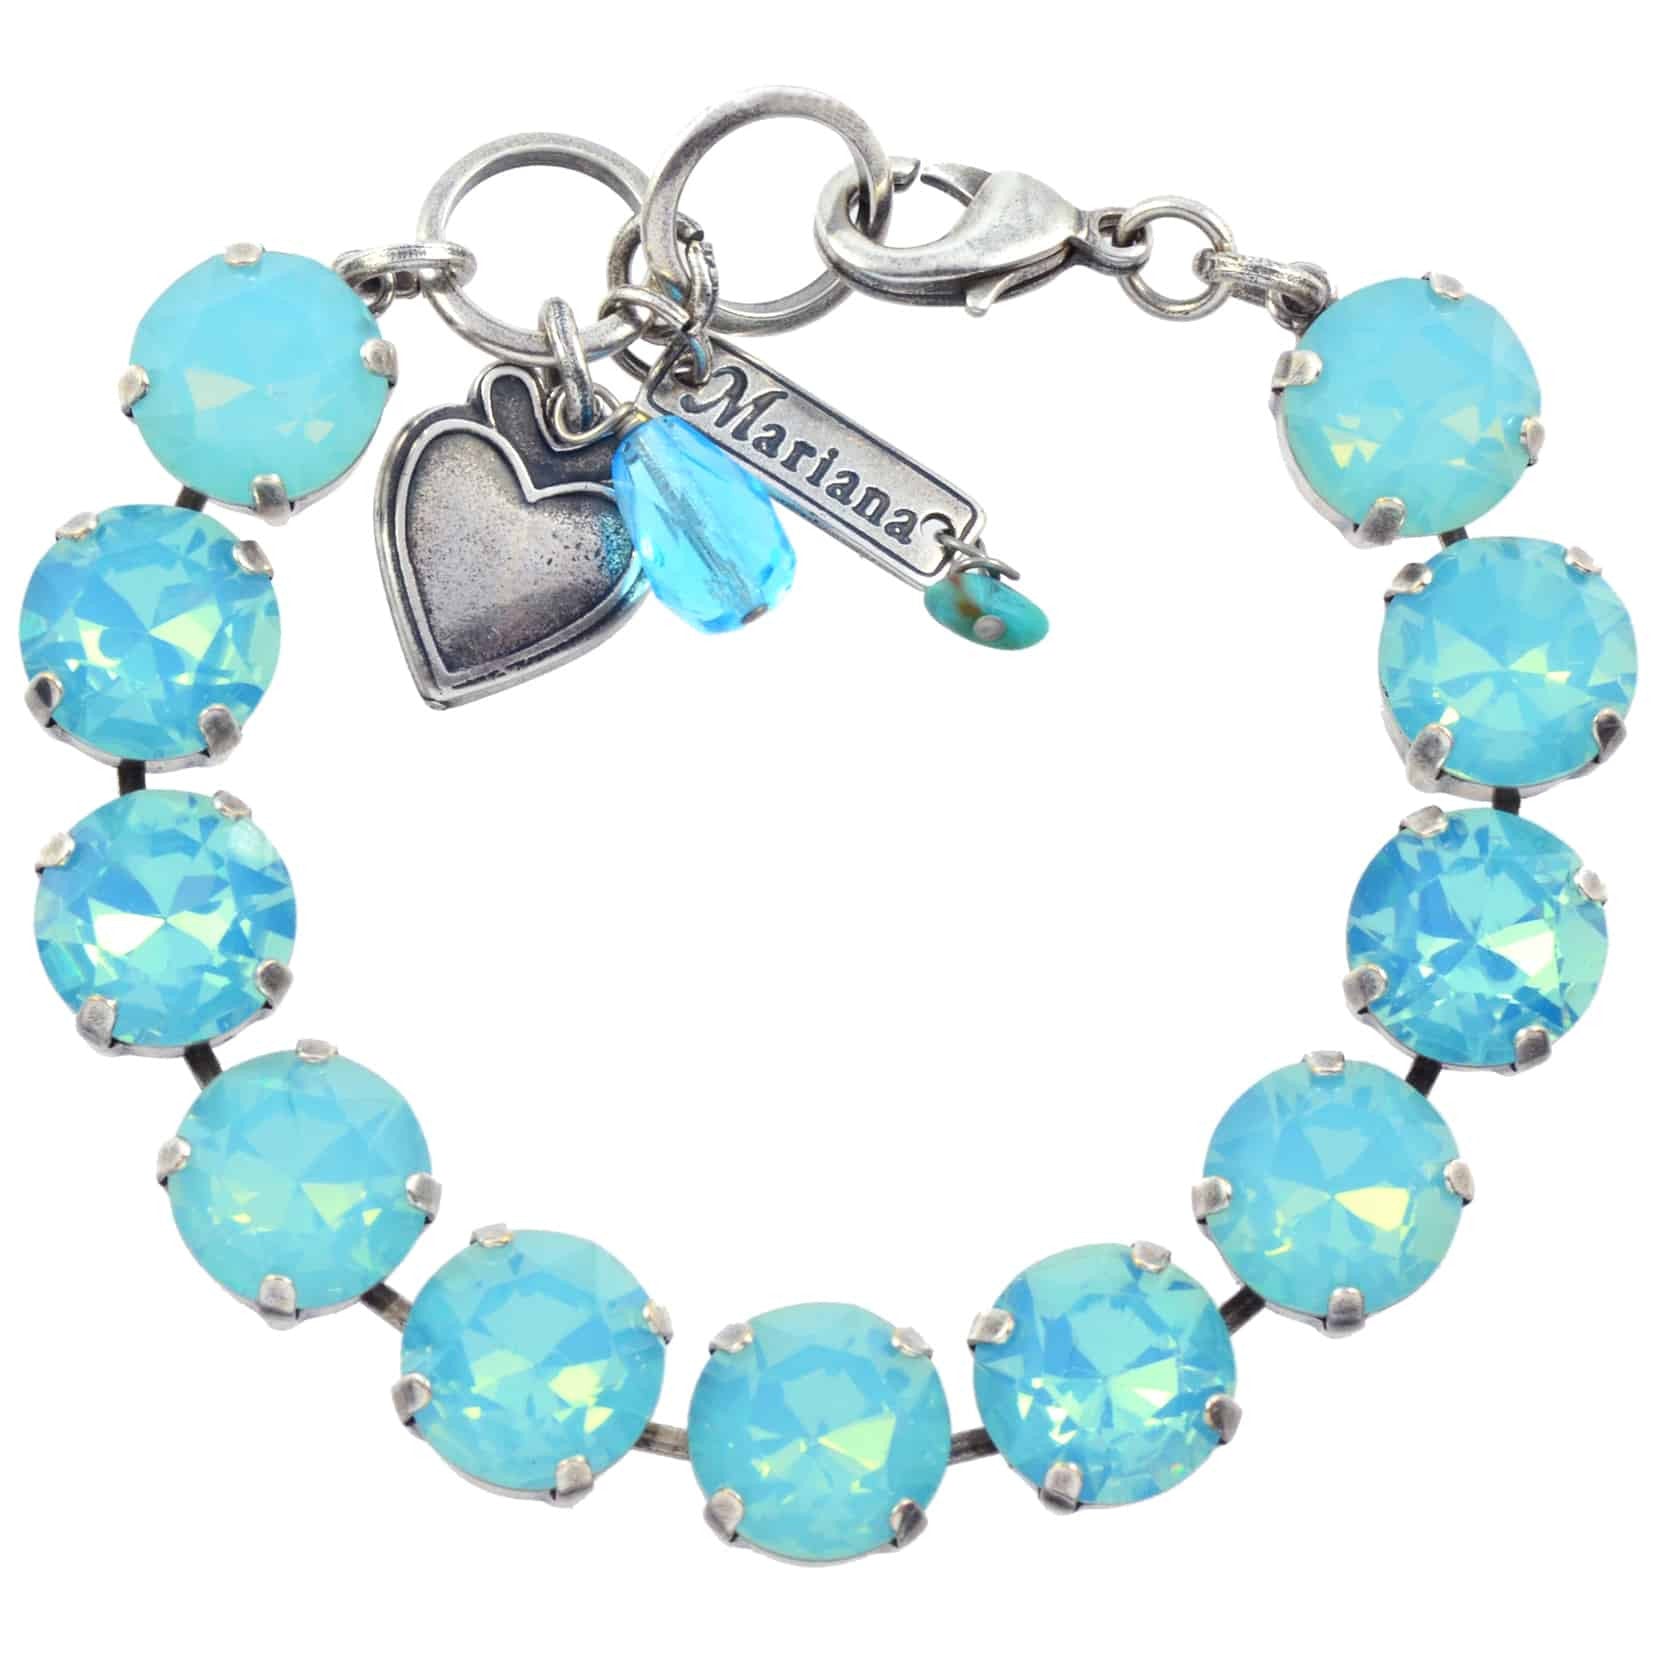 Mariana Jewelry Large Tennis Bracelet, Silver Plated with Indicolite crystal, 8 4474 050050